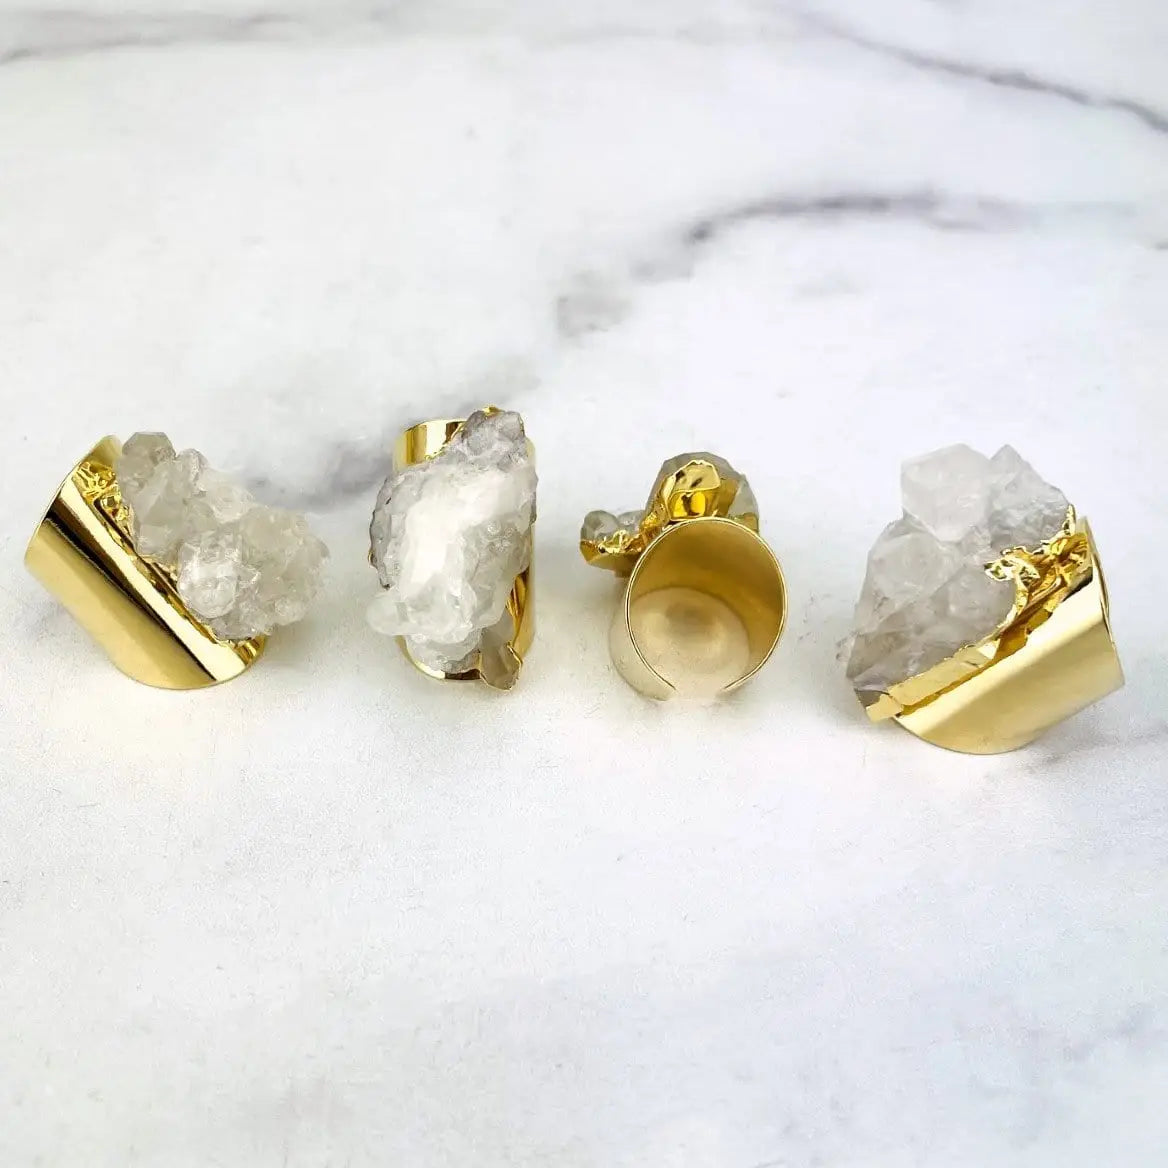 Crystal Cluster Ring with 24k Gold Electroplated Cigar Band - The Oracle Alchemist